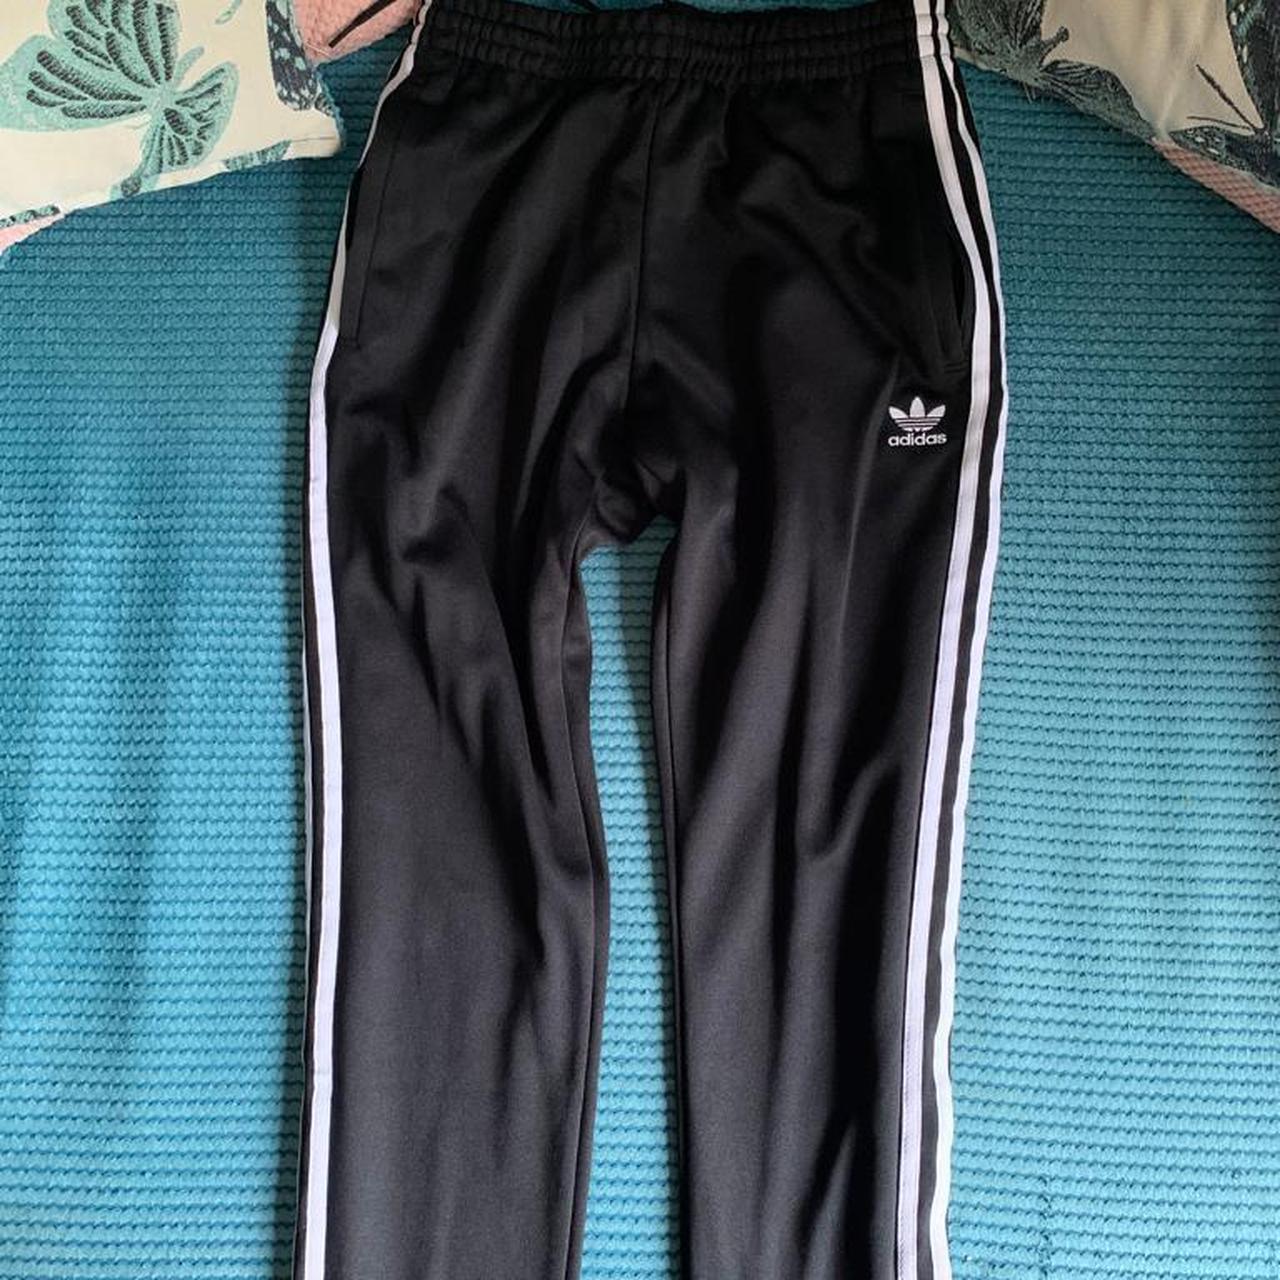 Adidas SST joggers- Wore once - Depop